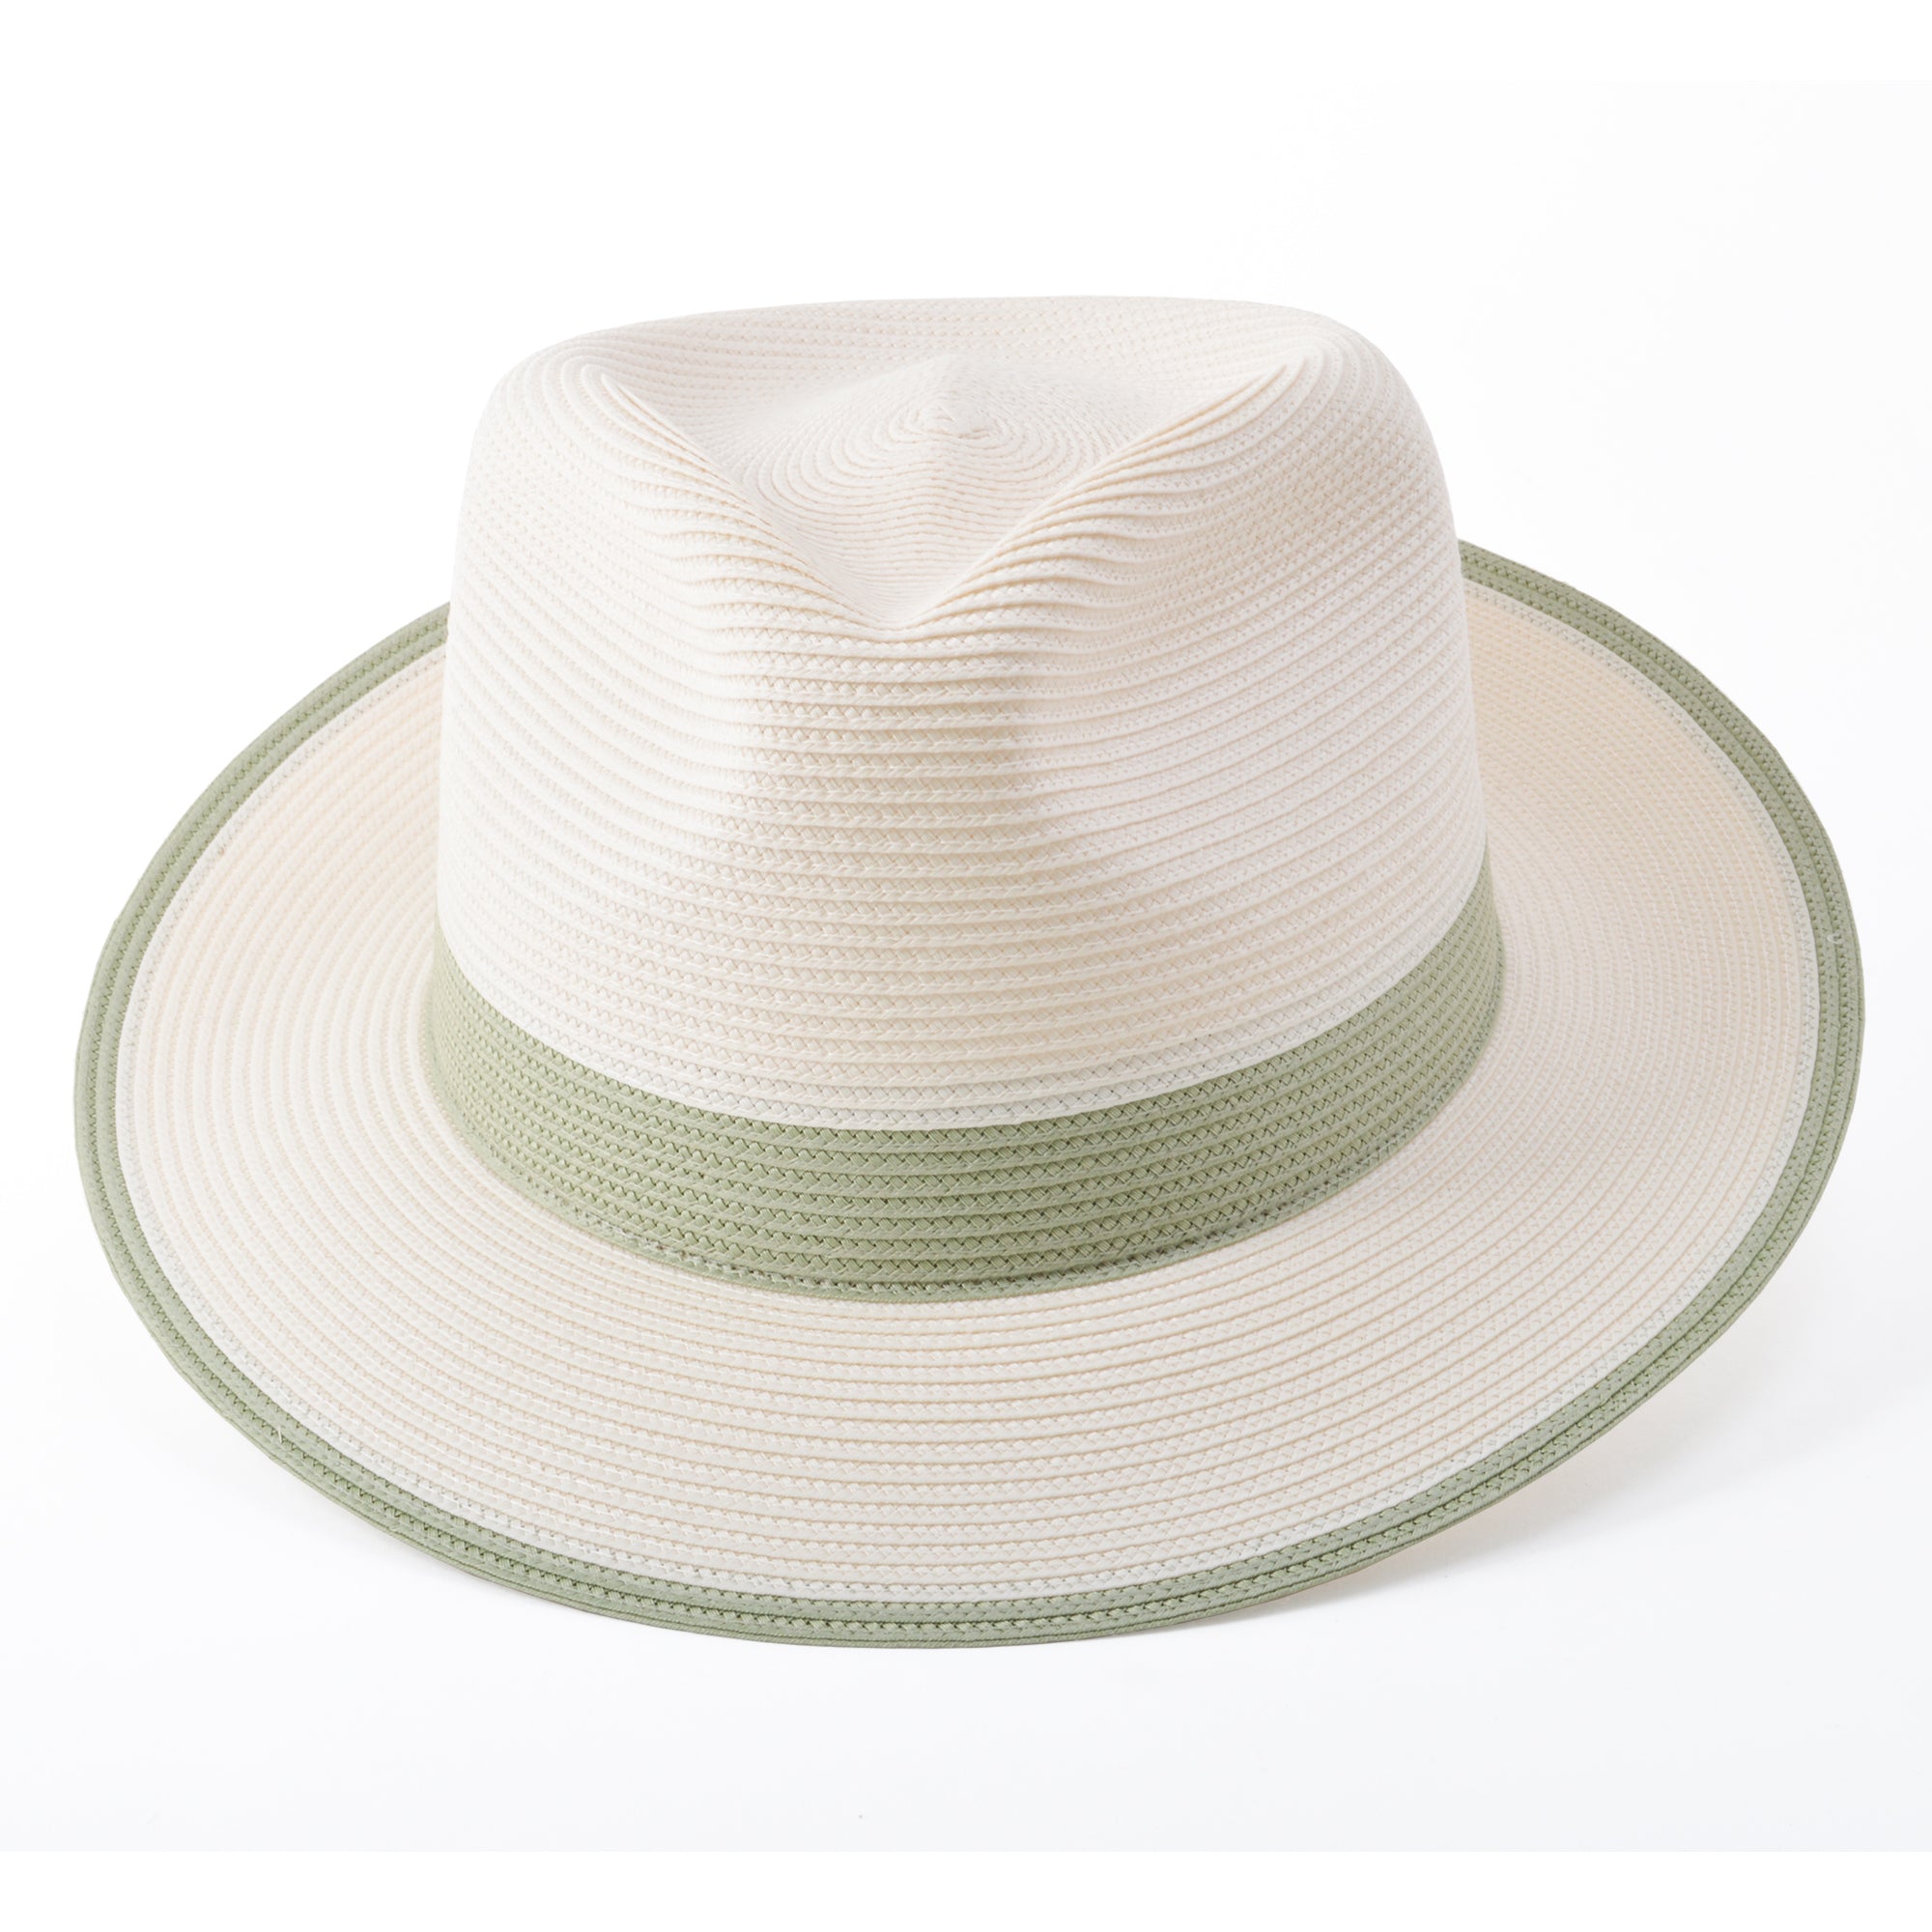 Dobbs Thumbs Up Milan Straw Hat in Ivory/Olive - 0